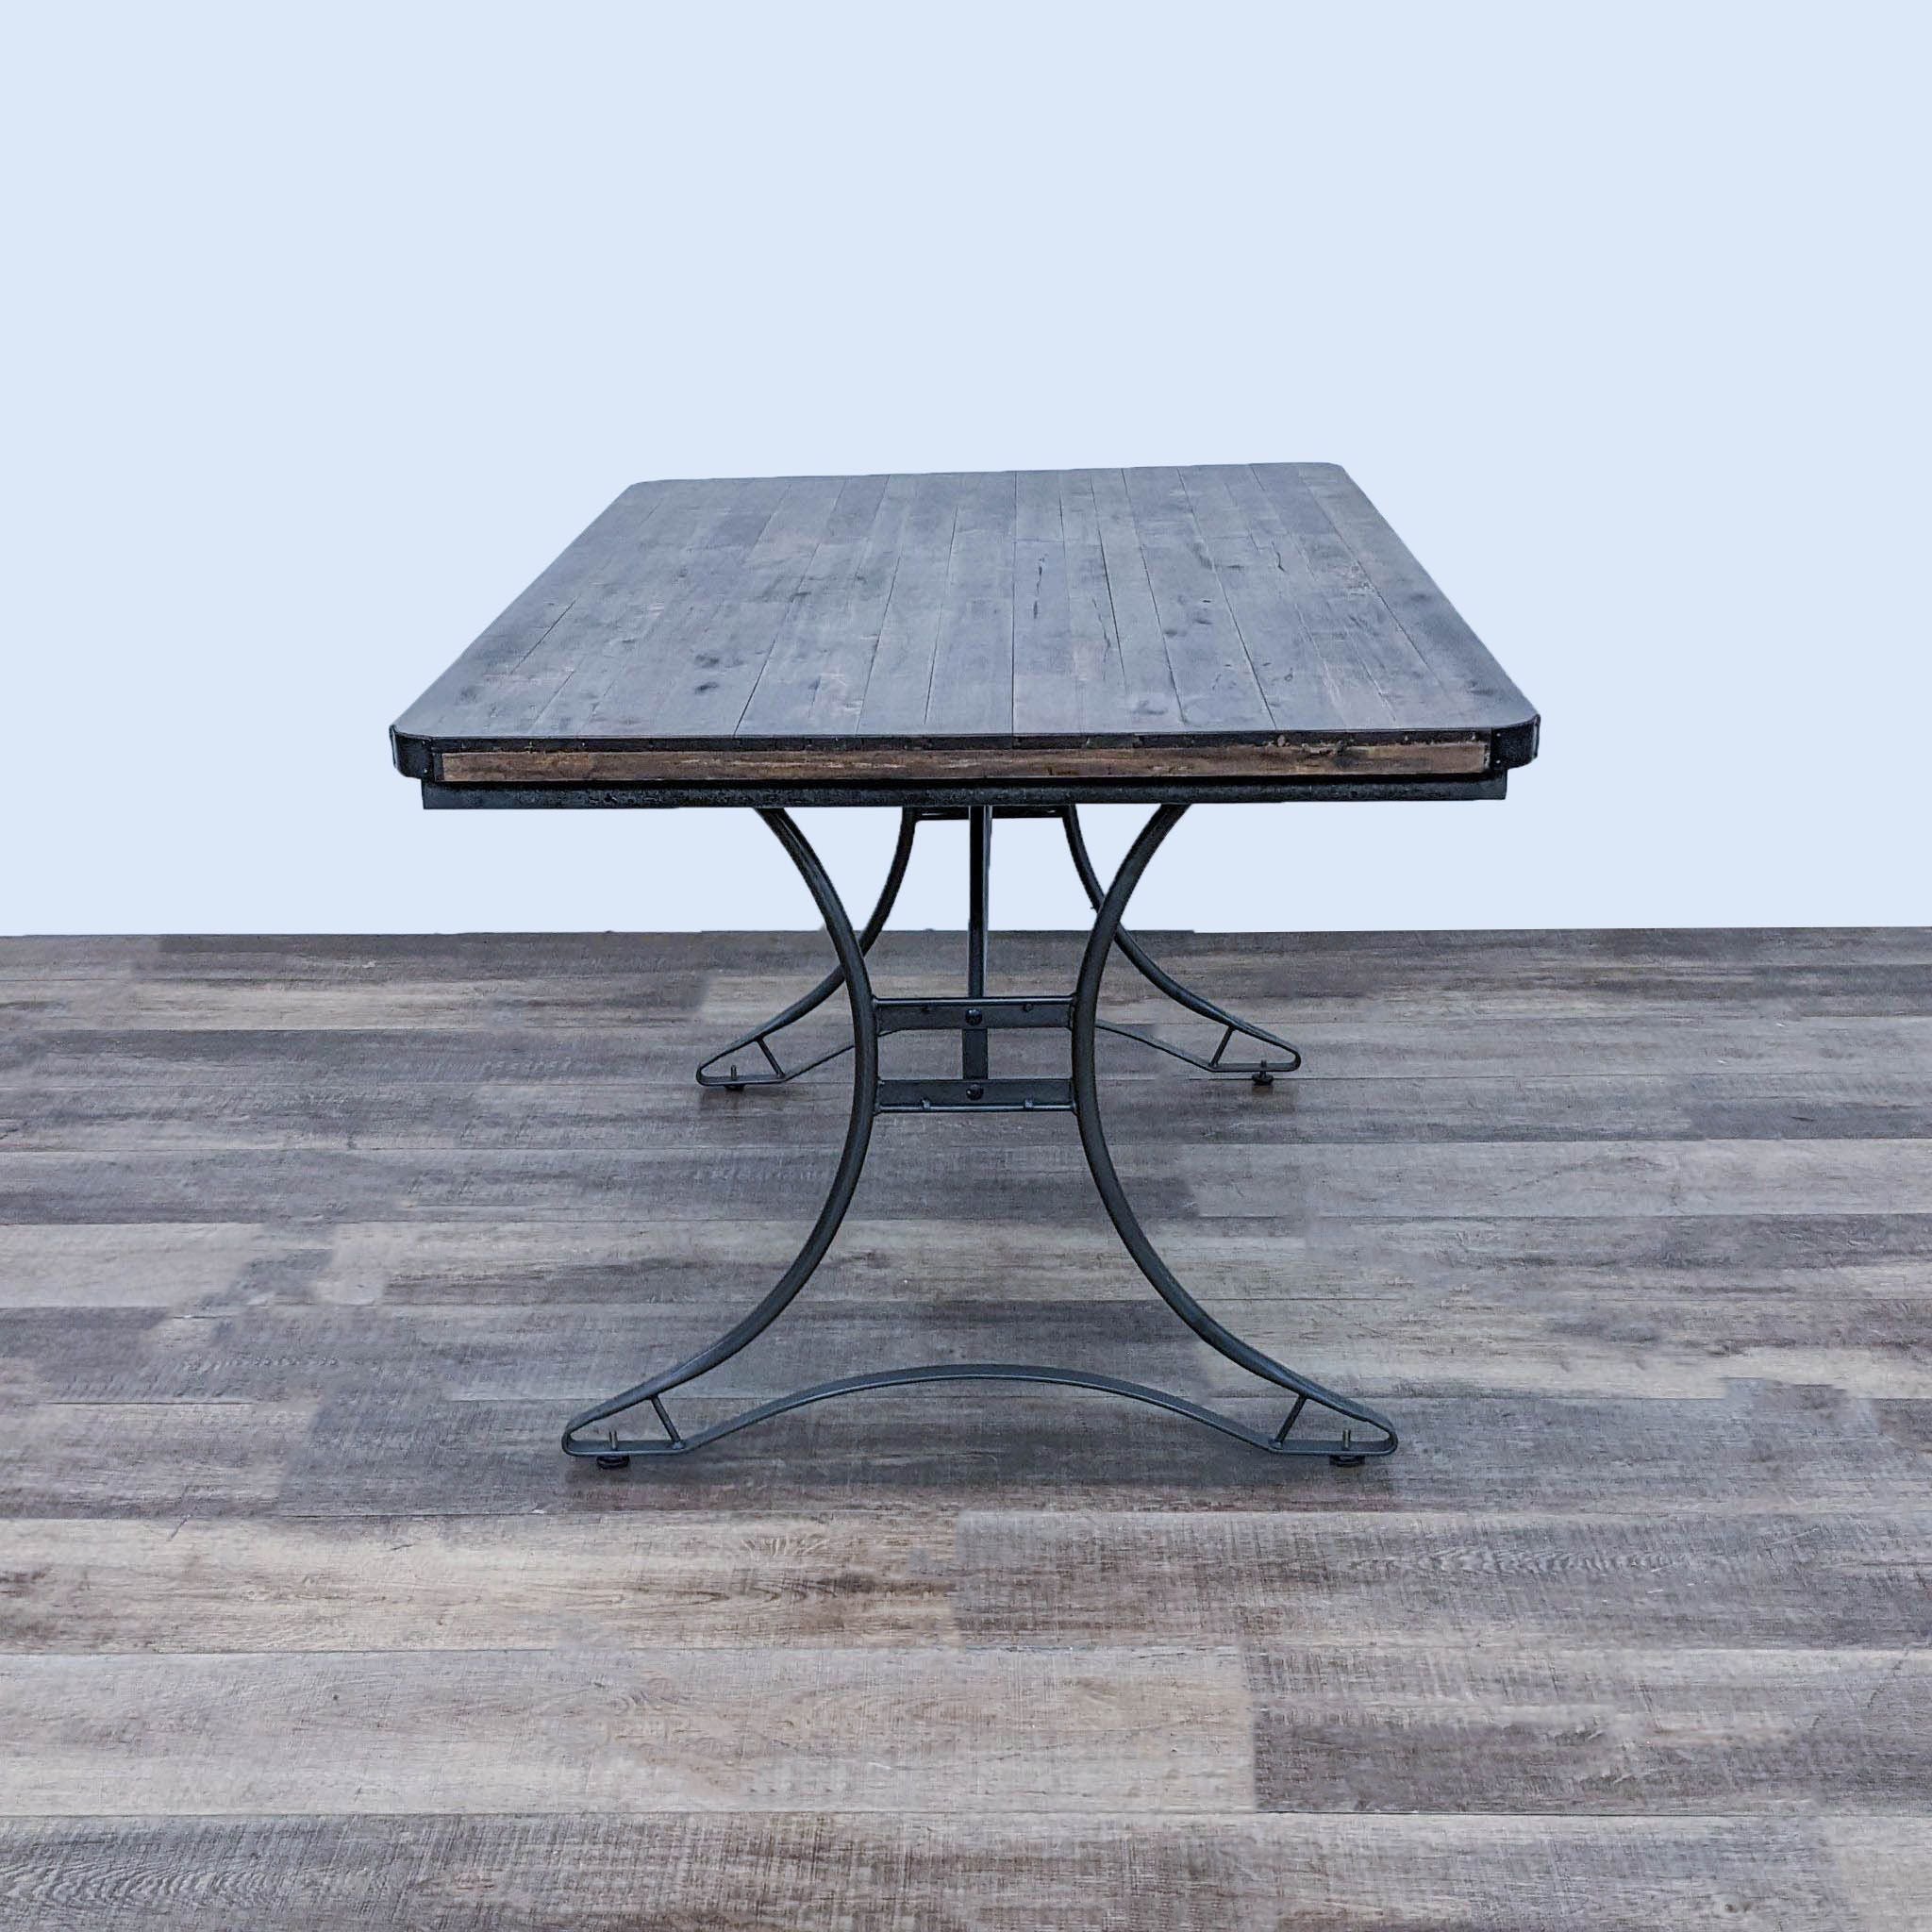 Cost Plus World Market's Jackson dining table, displaying a solid wooden top with dark finish and sturdy metal base.